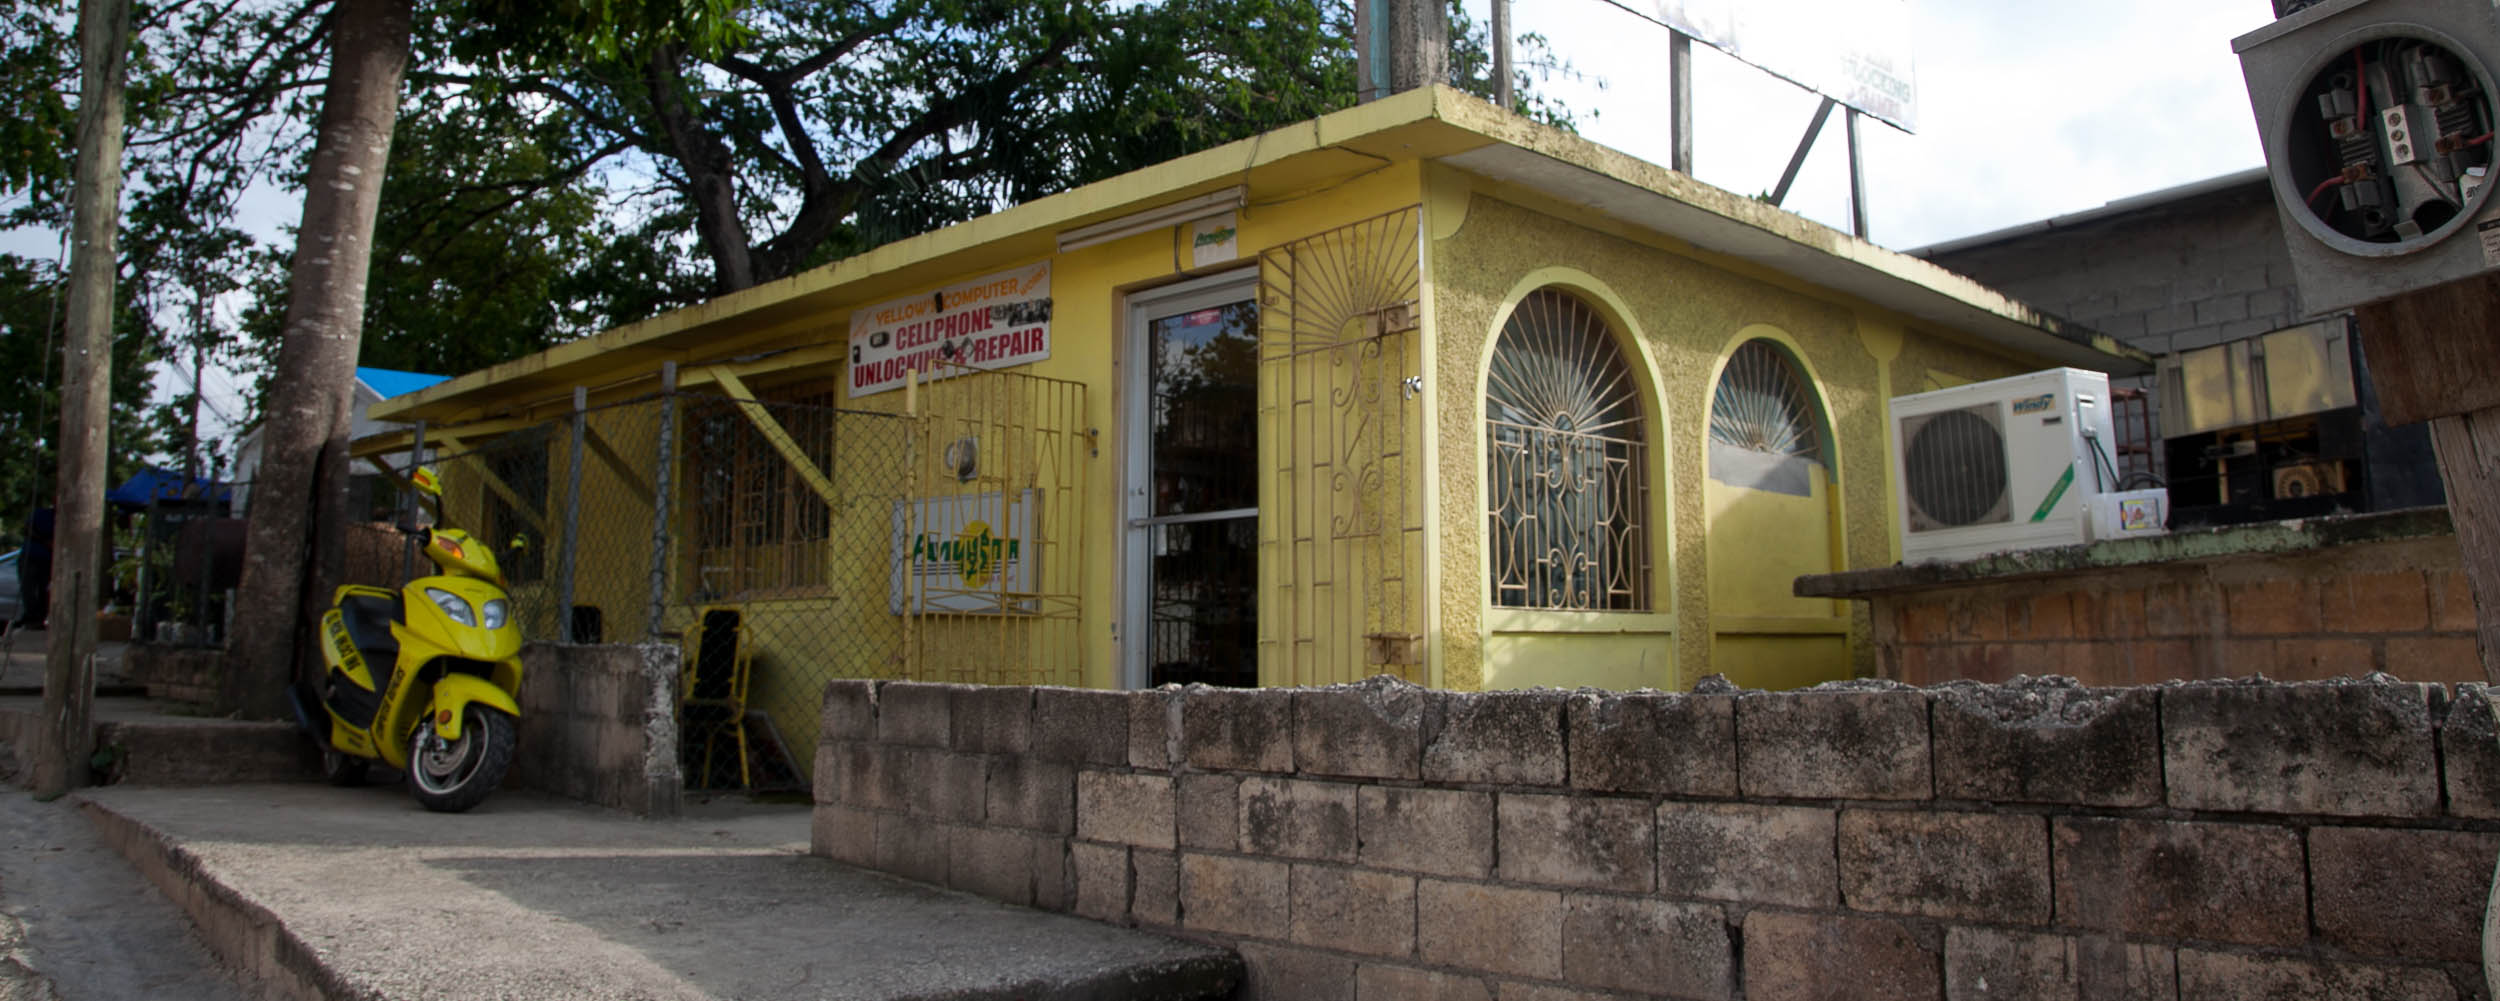 Yellow's Computer Works - Negril Jamaica